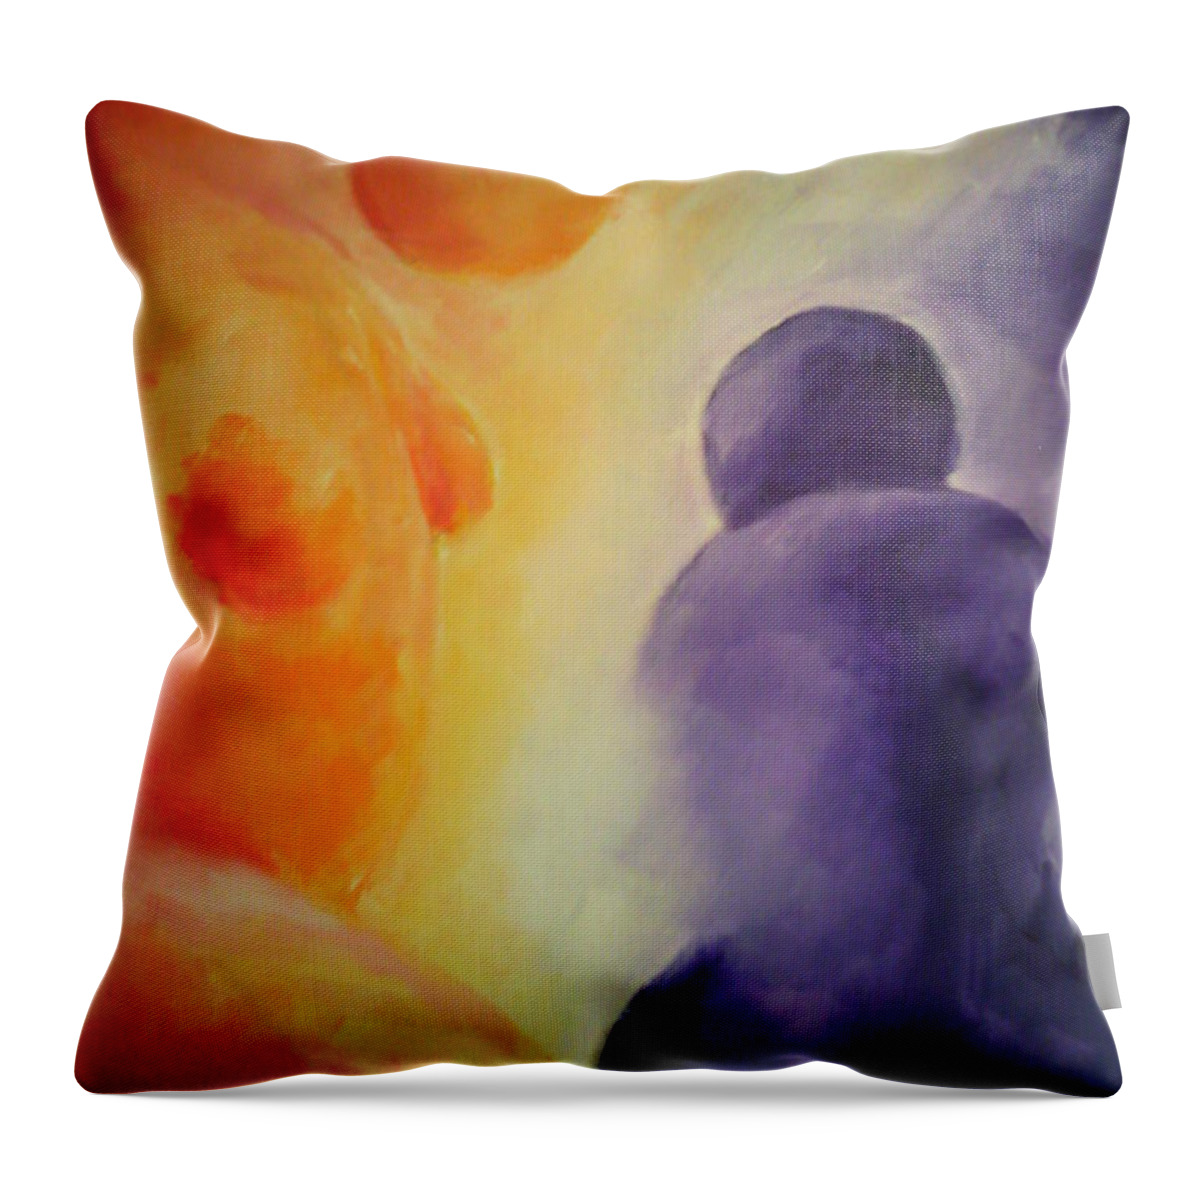 Orange Throw Pillow featuring the painting Let Me Comfort You by Jennifer Hannigan-Green